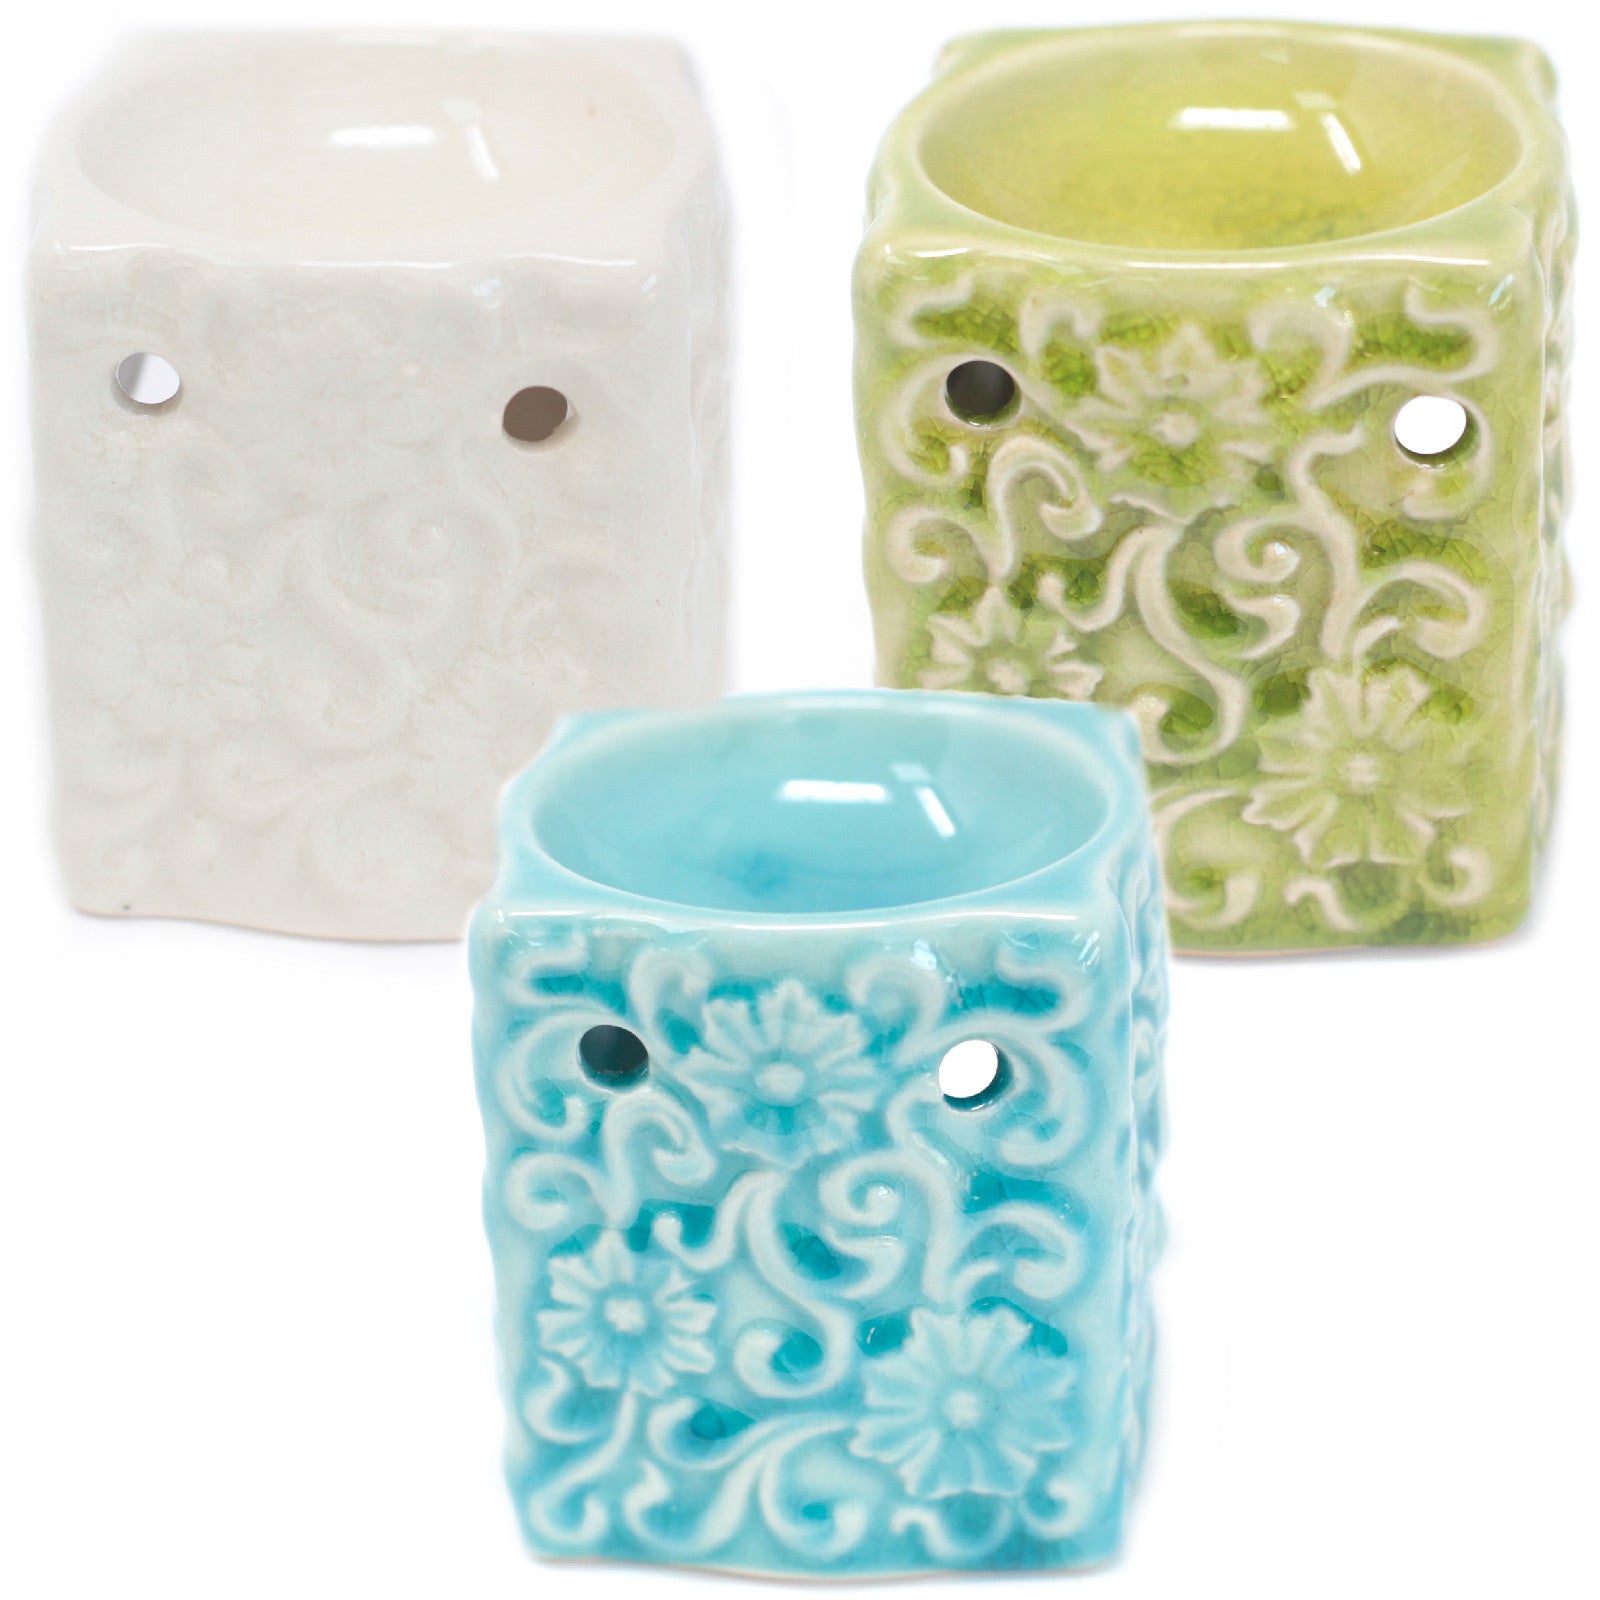 View Classic Small Square Floral Oil Burners aast information